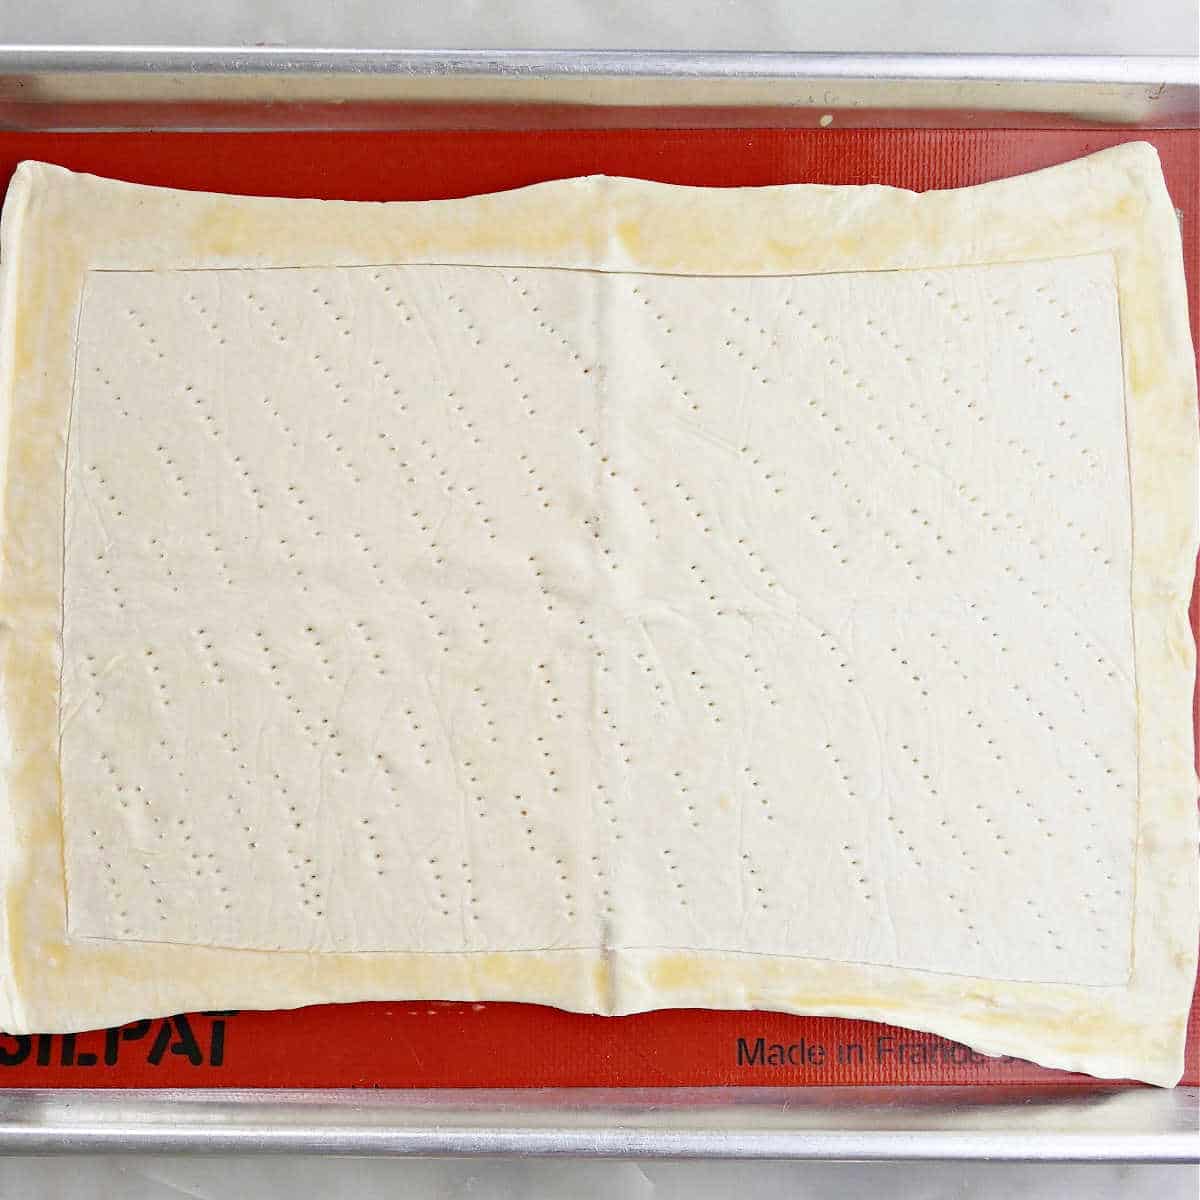 puff pastry on a lined baking sheet with egg wash brushed on edges